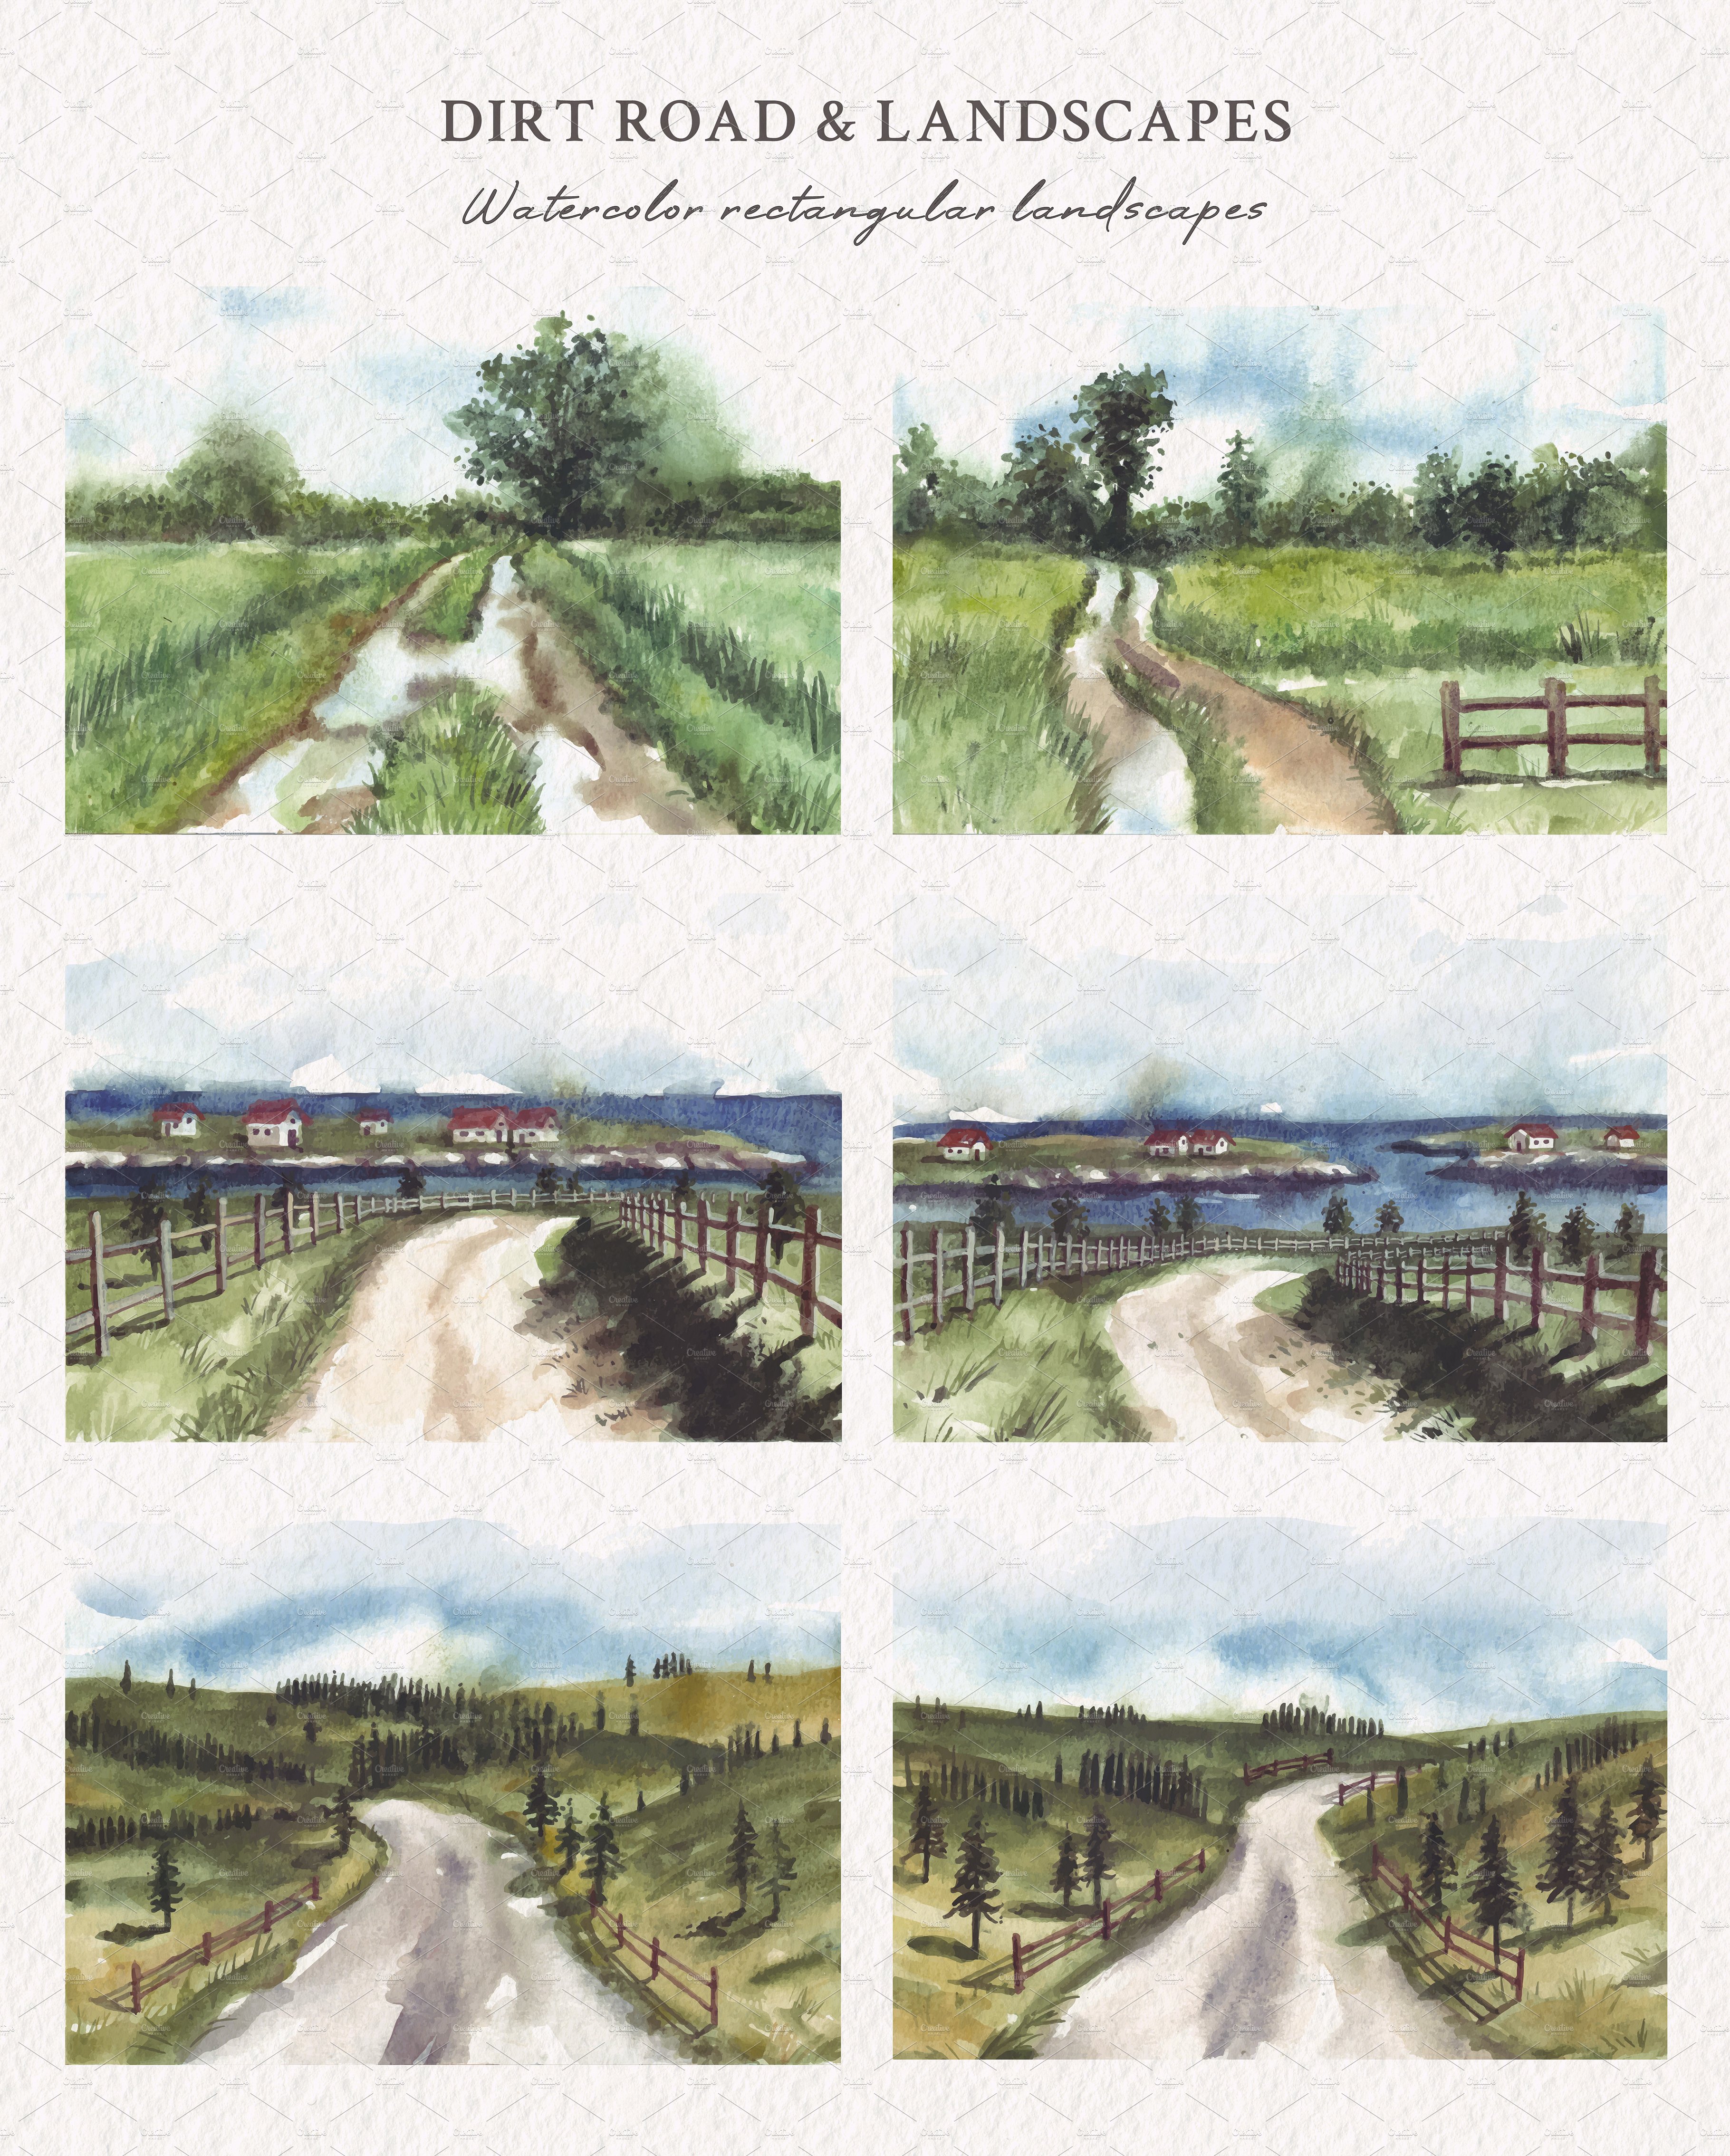 Drawing of a dirt road and landscapes.